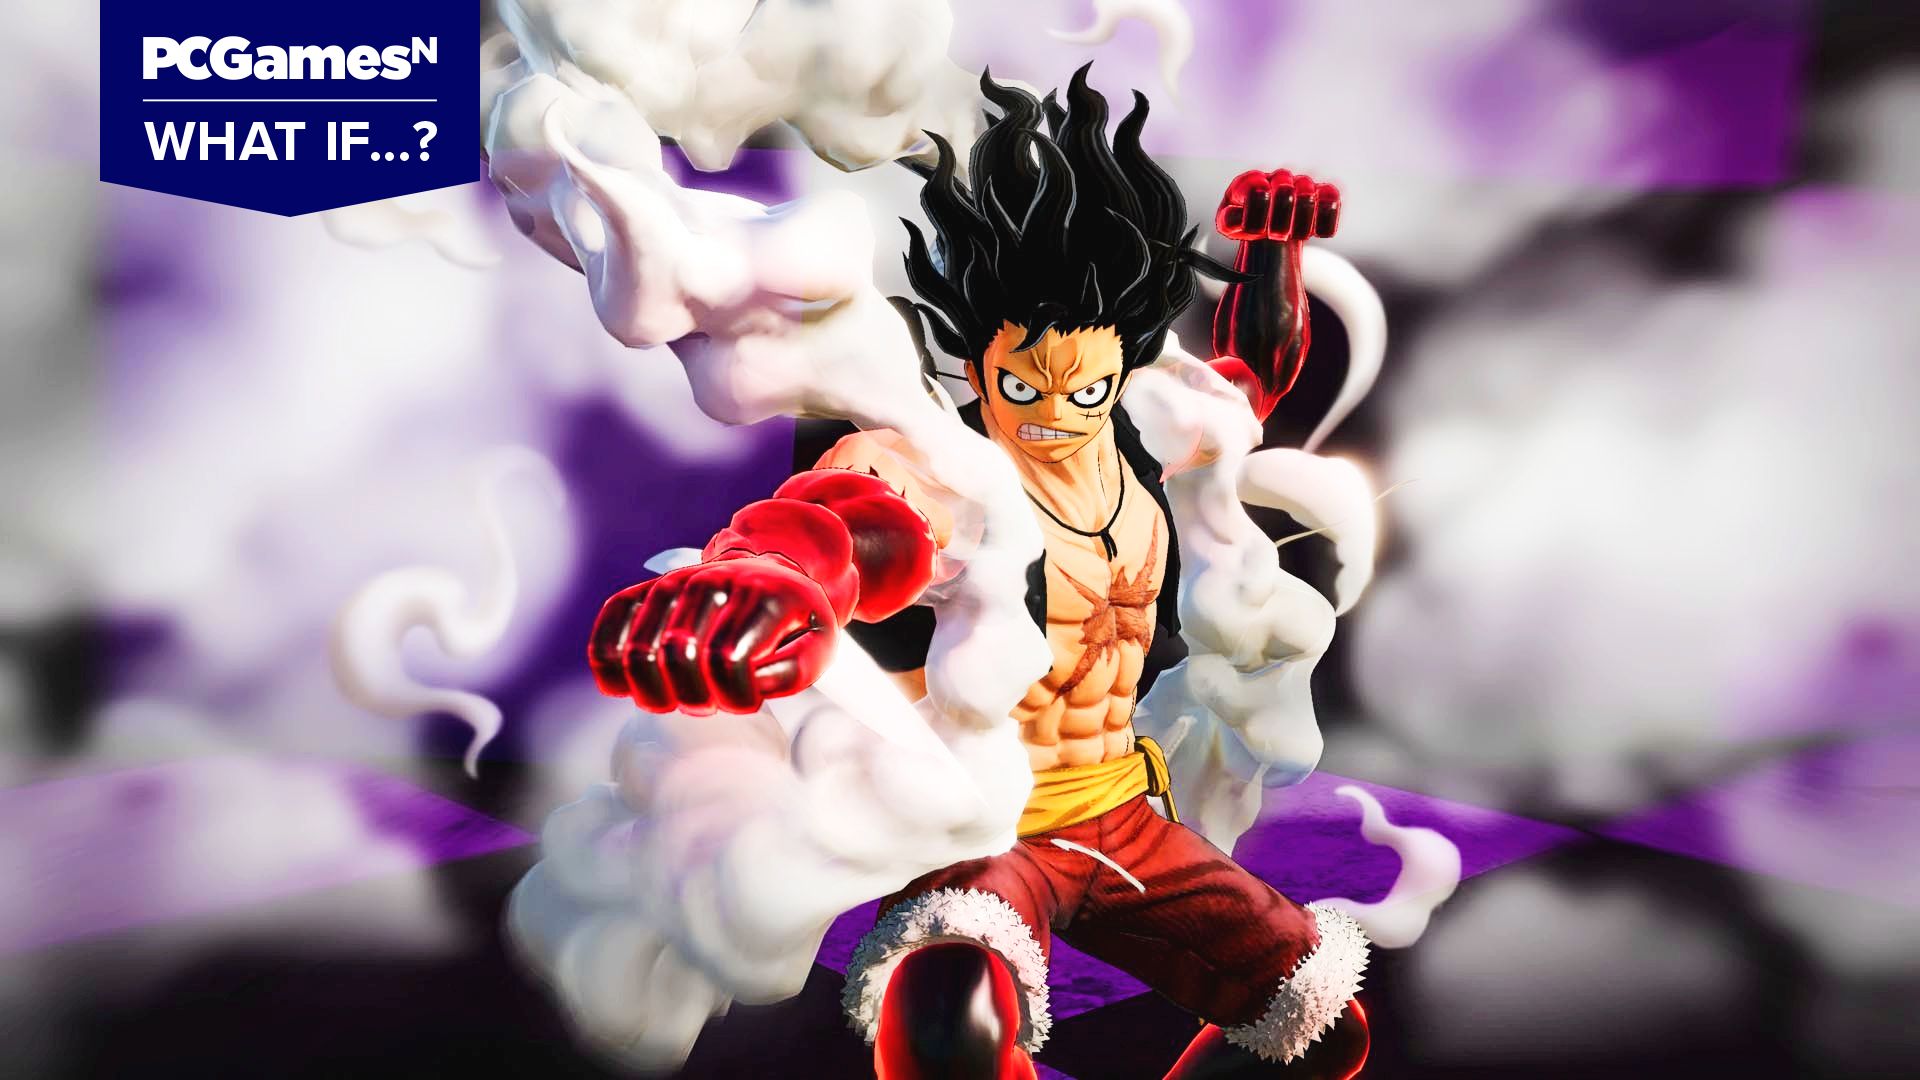 Classic 2D One Piece fighting game mockup has fans hoping for more - Dot  Esports